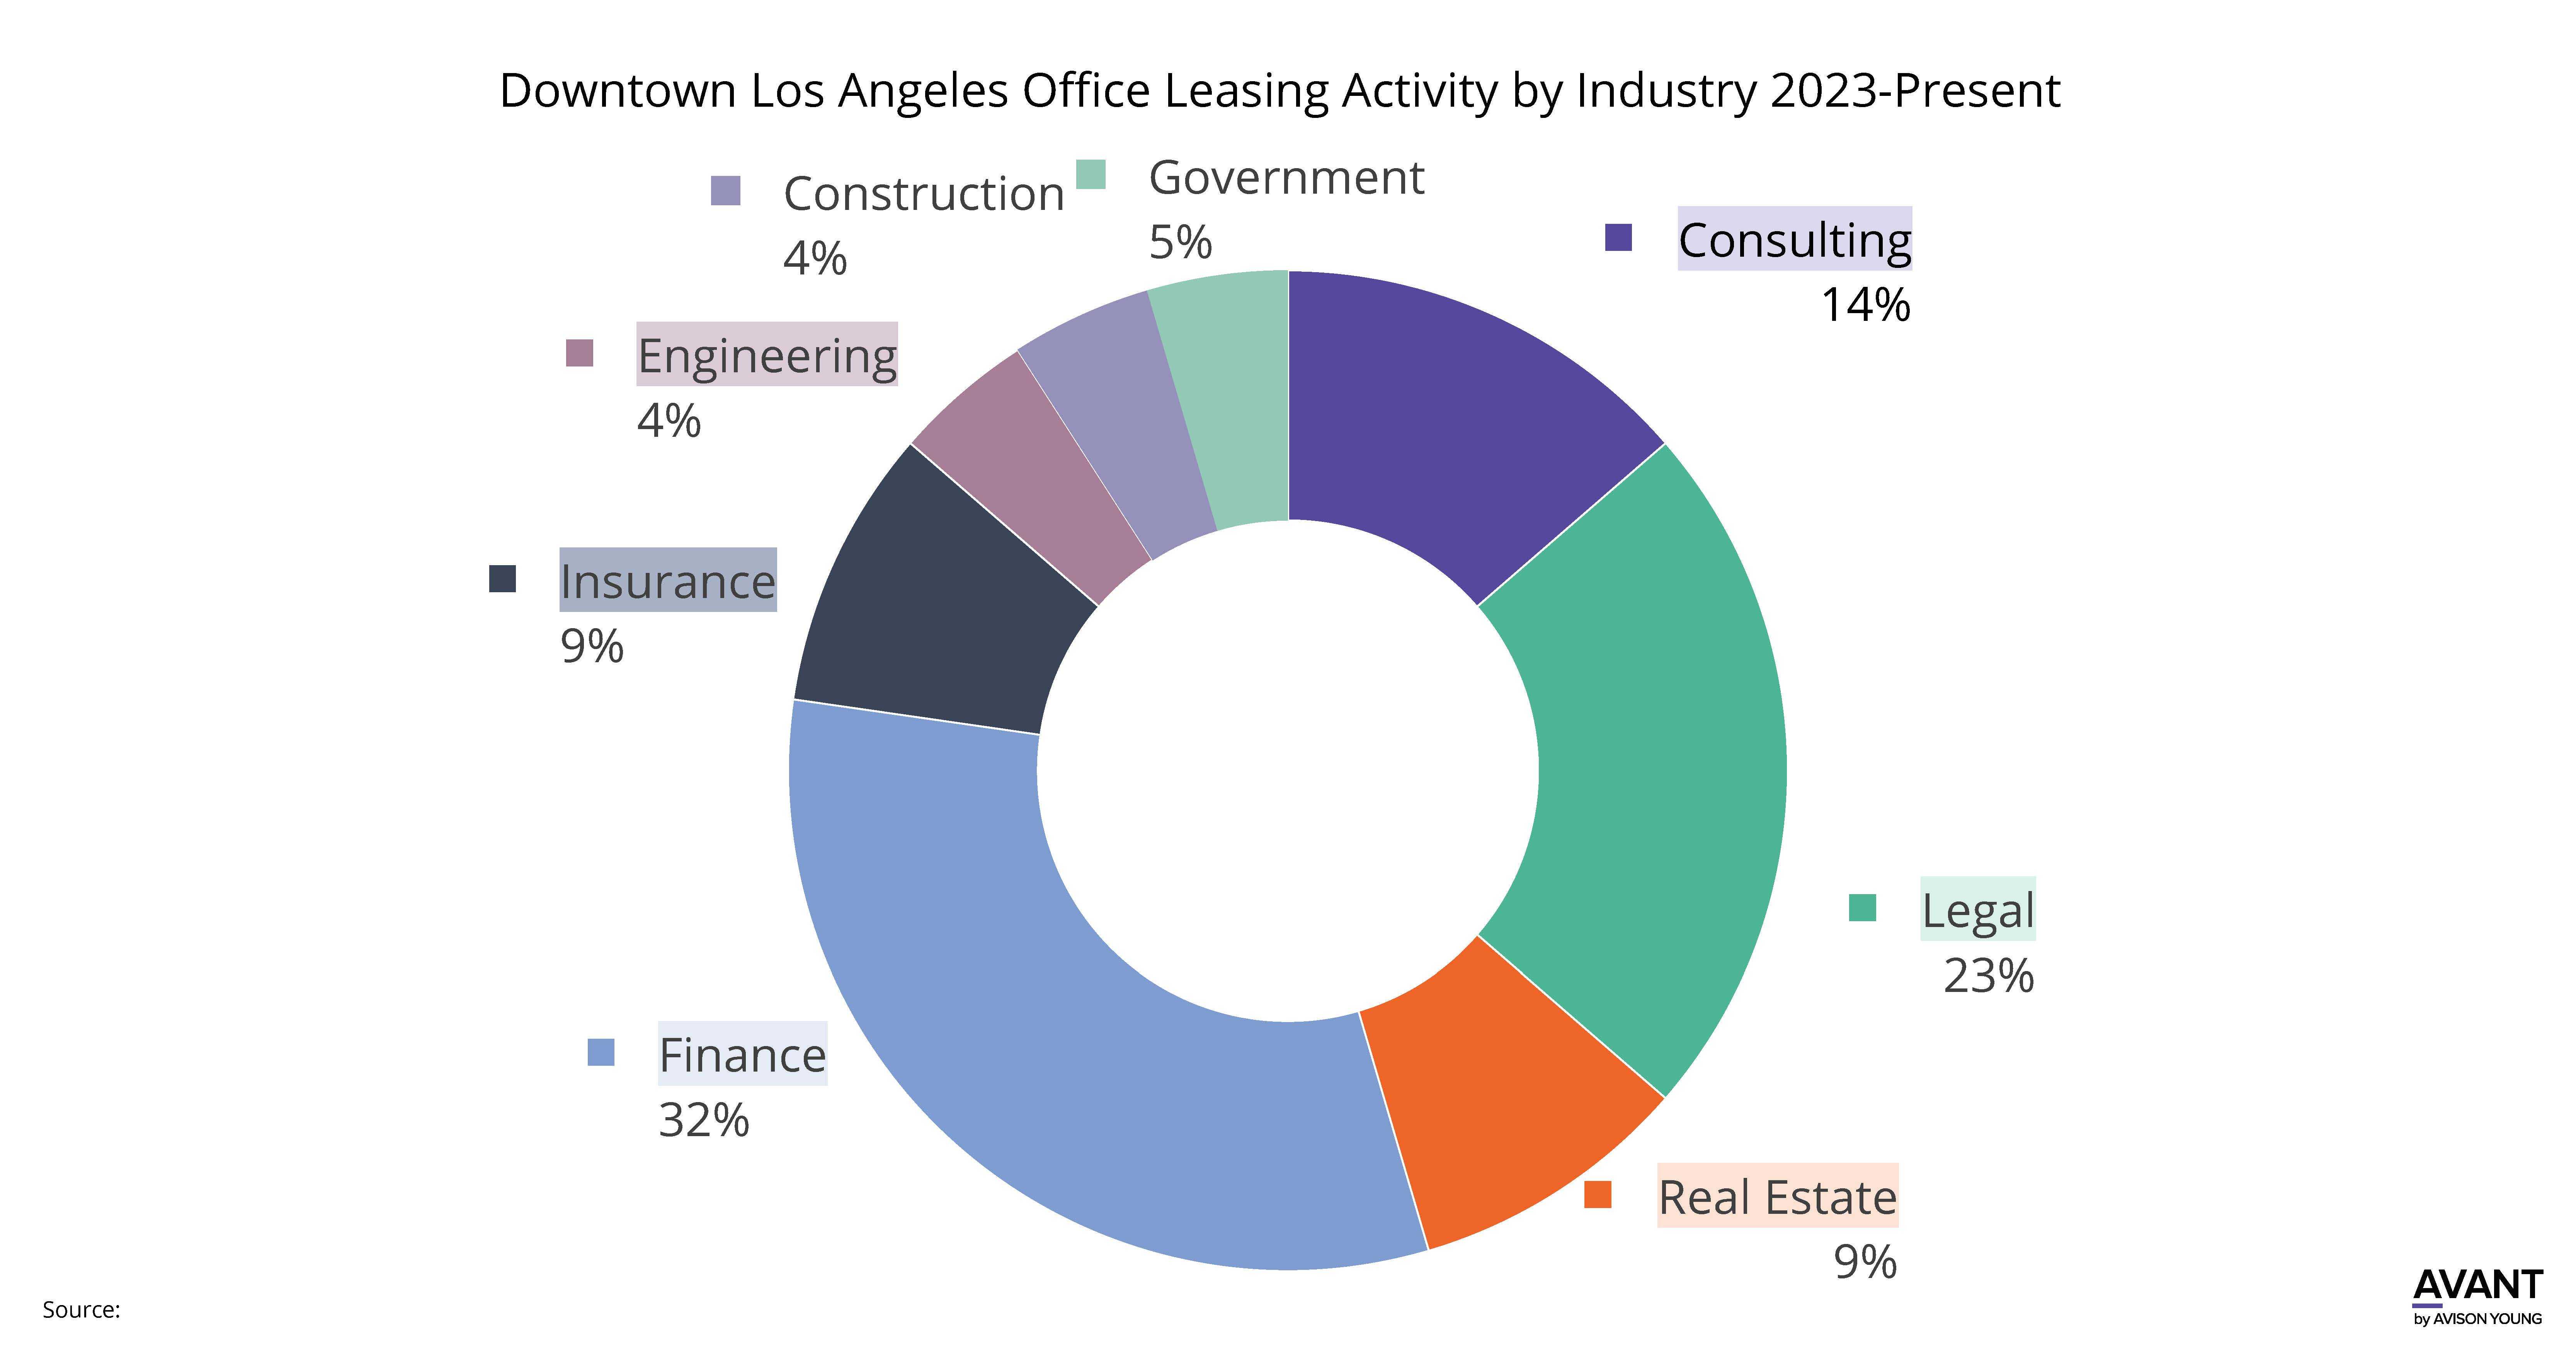 The chart illustrates the tenant makeup by industry for recently signed leases in Downtown Los Angeles